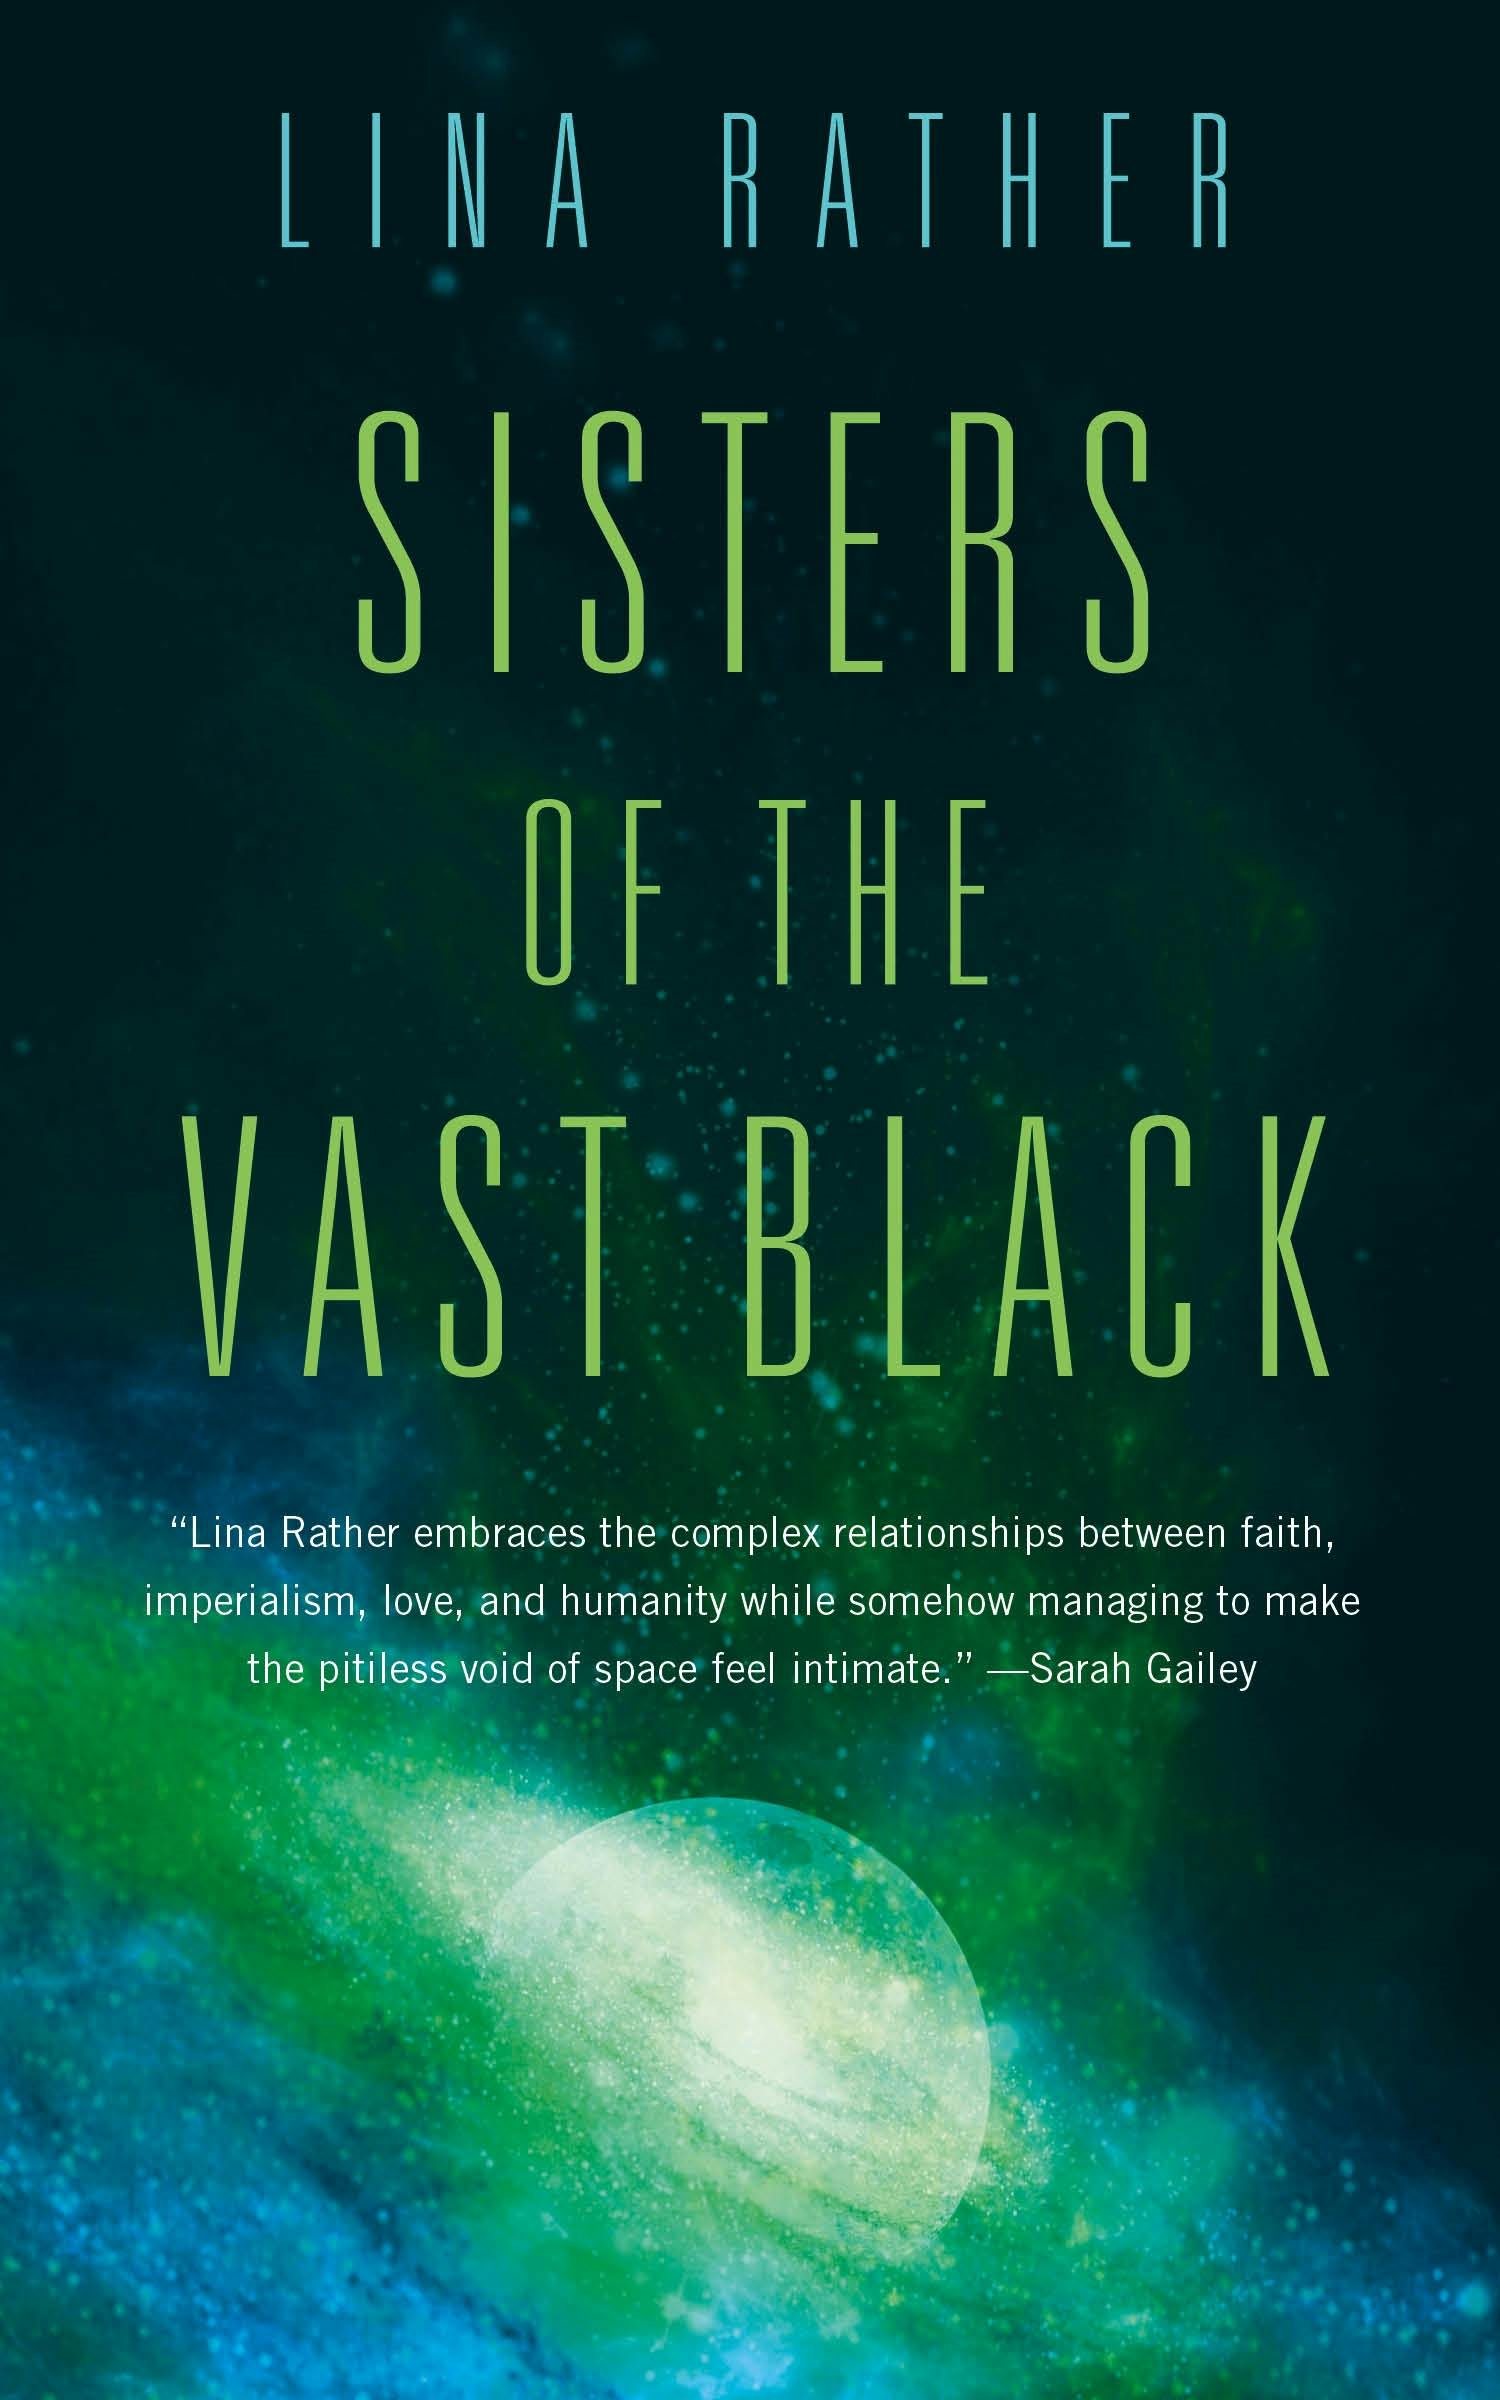 Cover for the book titled as: Sisters of the Vast Black